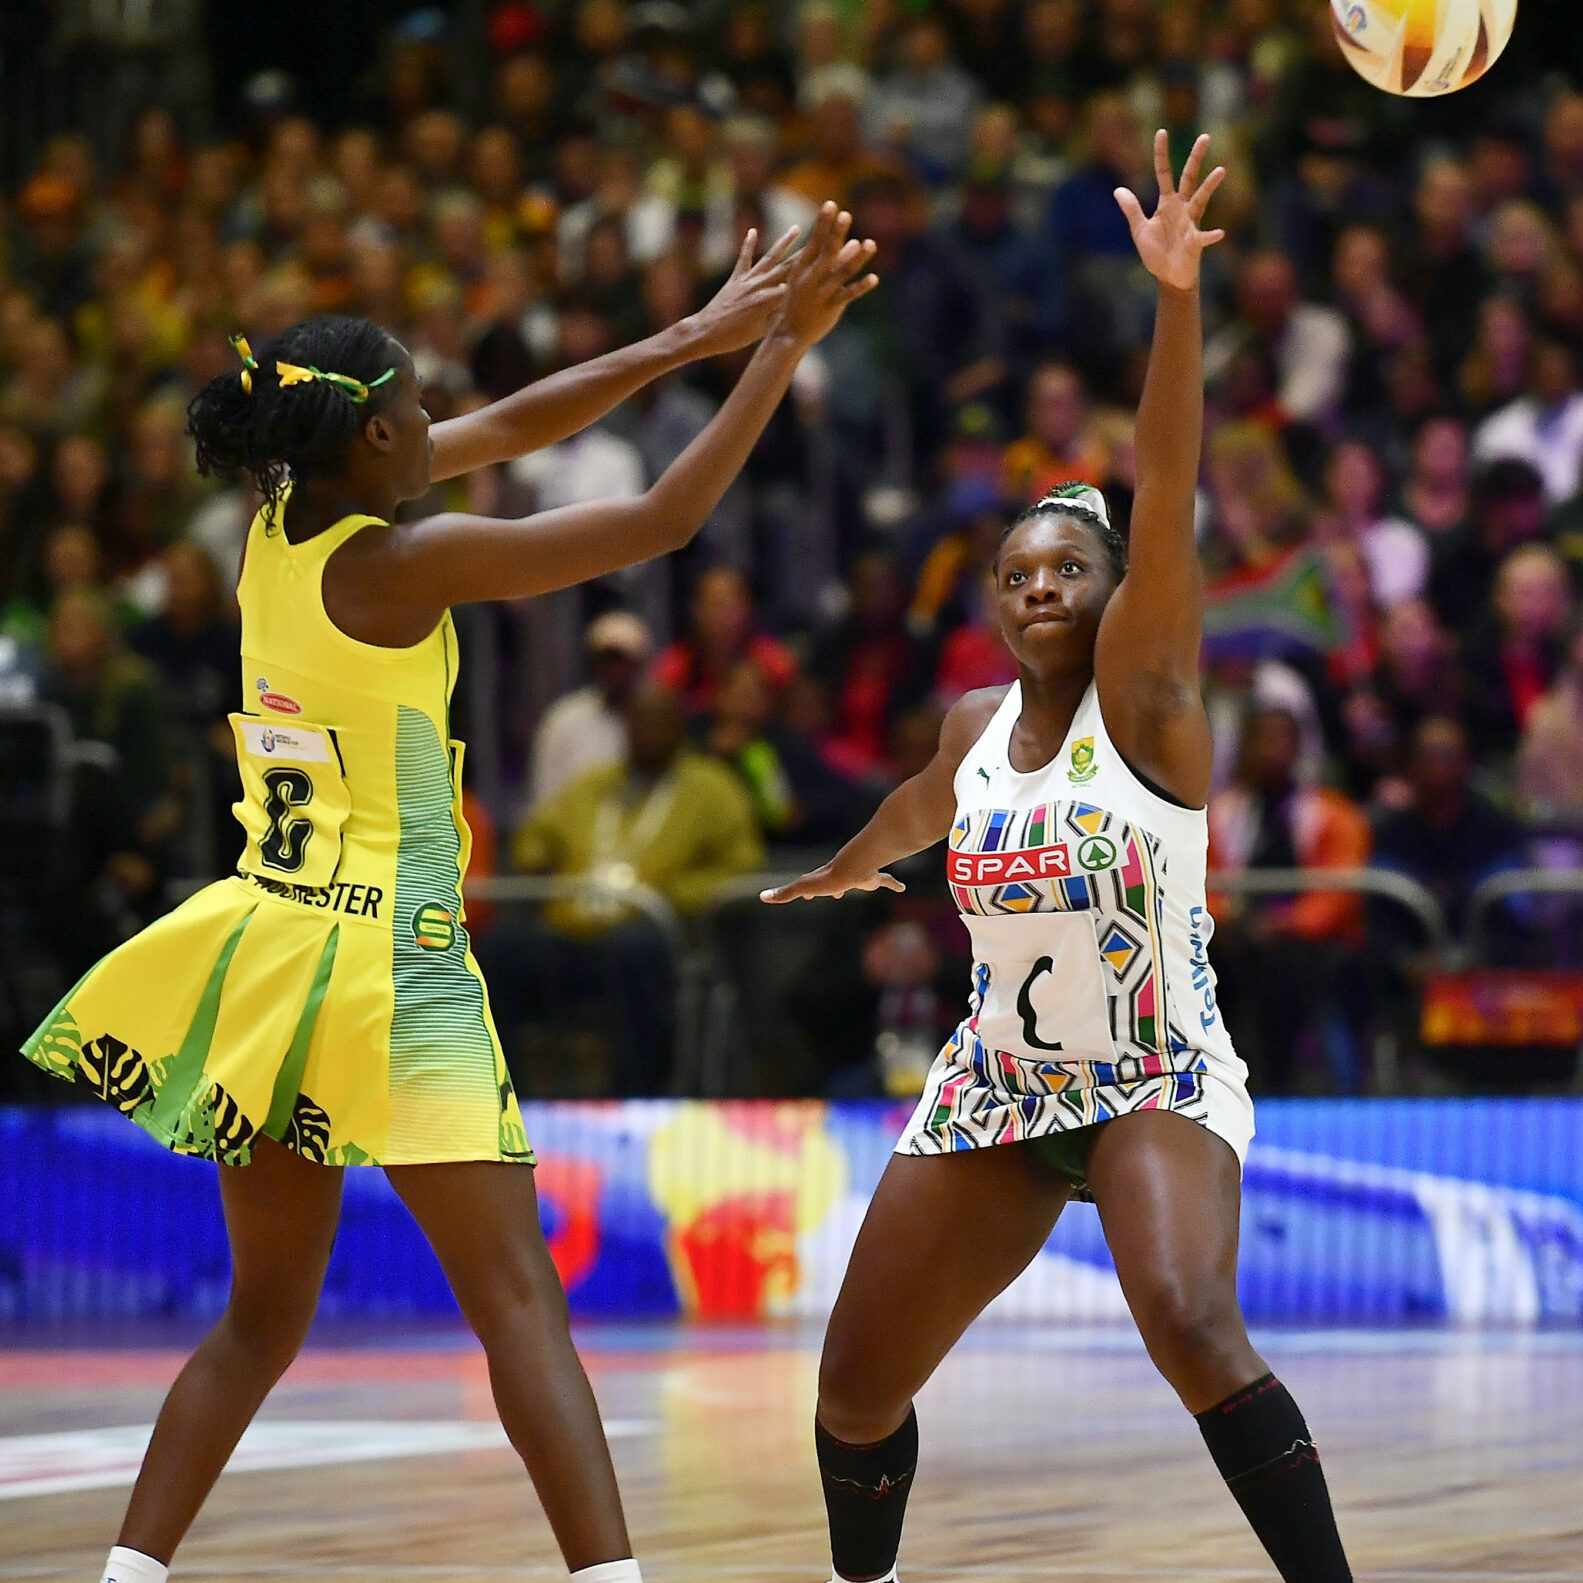 CAPE TOWN, SOUTH AFRICA - JULY 30: Nicole Dixon-Rochester of Jamaica and Khanyisa Chawane of South Africa during the Netball World Cup 2023, Pool C match between Jamaica and South Africa at Cape Town International Convention Centre Court 1 on July 30, 2023 in Cape Town, South Africa. (Photo by Ashley Vlotman/Gallo Images/Netball World Cup 2023)